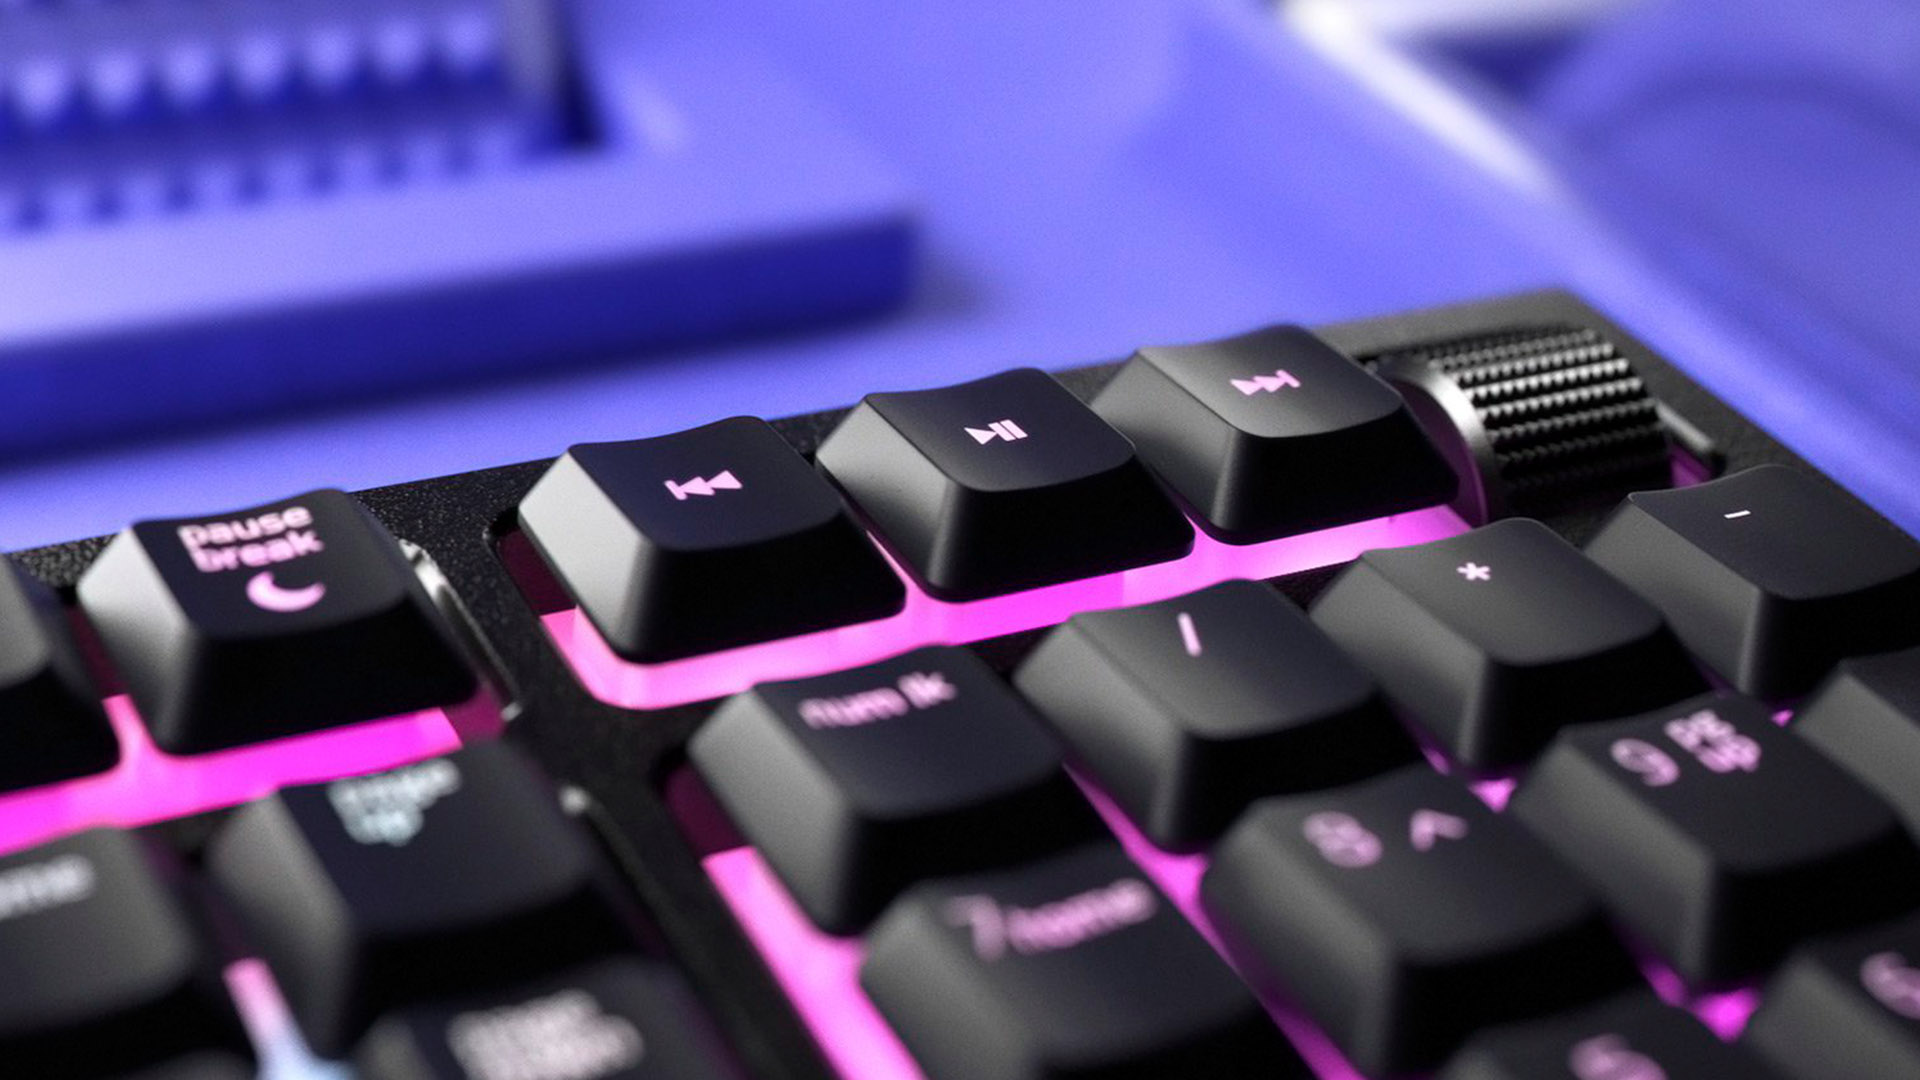 Gaming keyboards are up to 23% cheaper at Best Buy this weekend